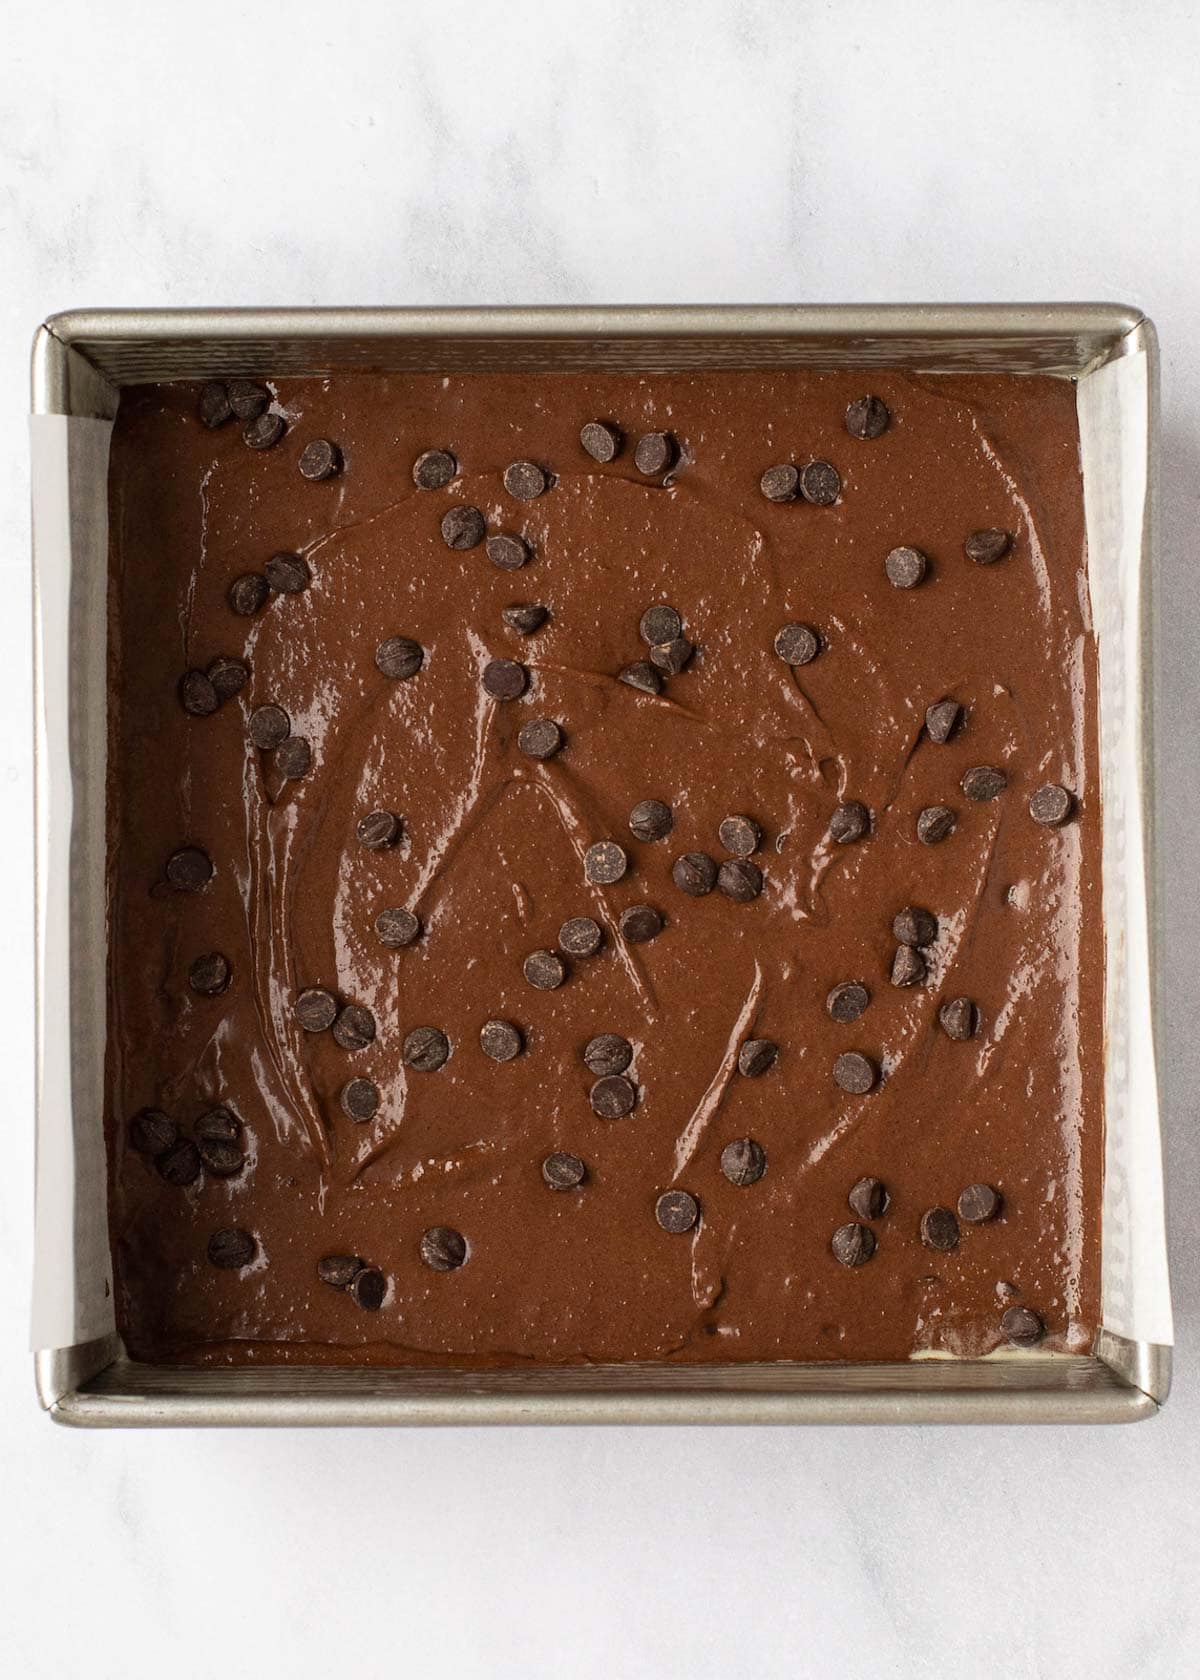 Overhead view of unbaked brownies in a pan